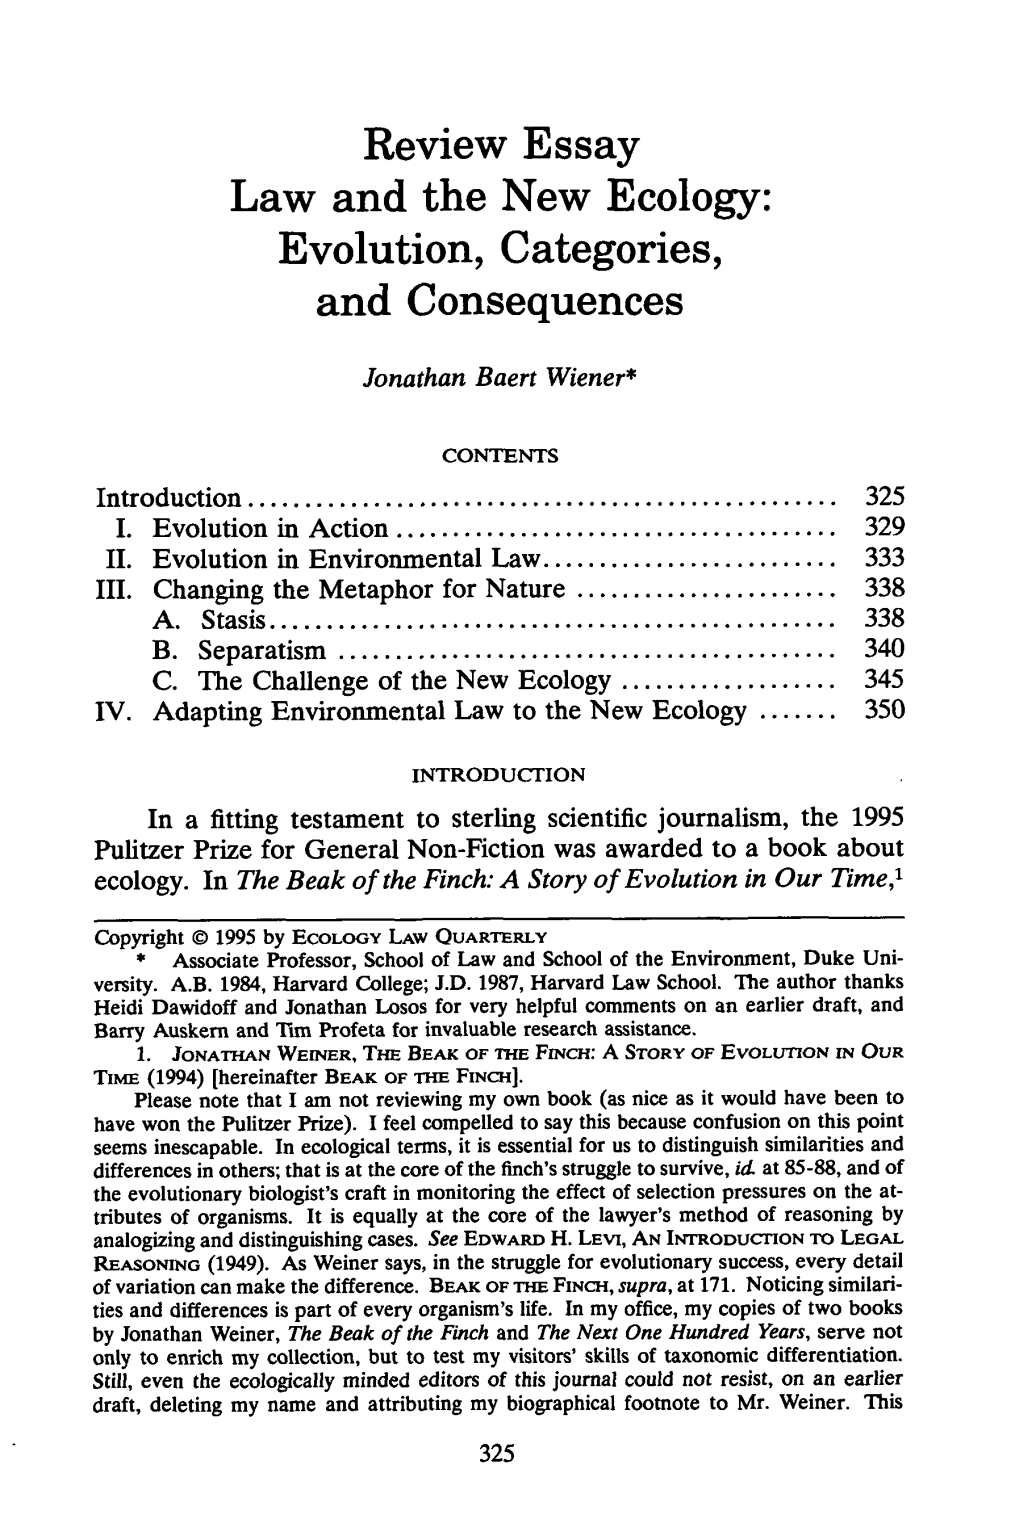 Law and the New Ecology: Evolution, Categories, and Consequences